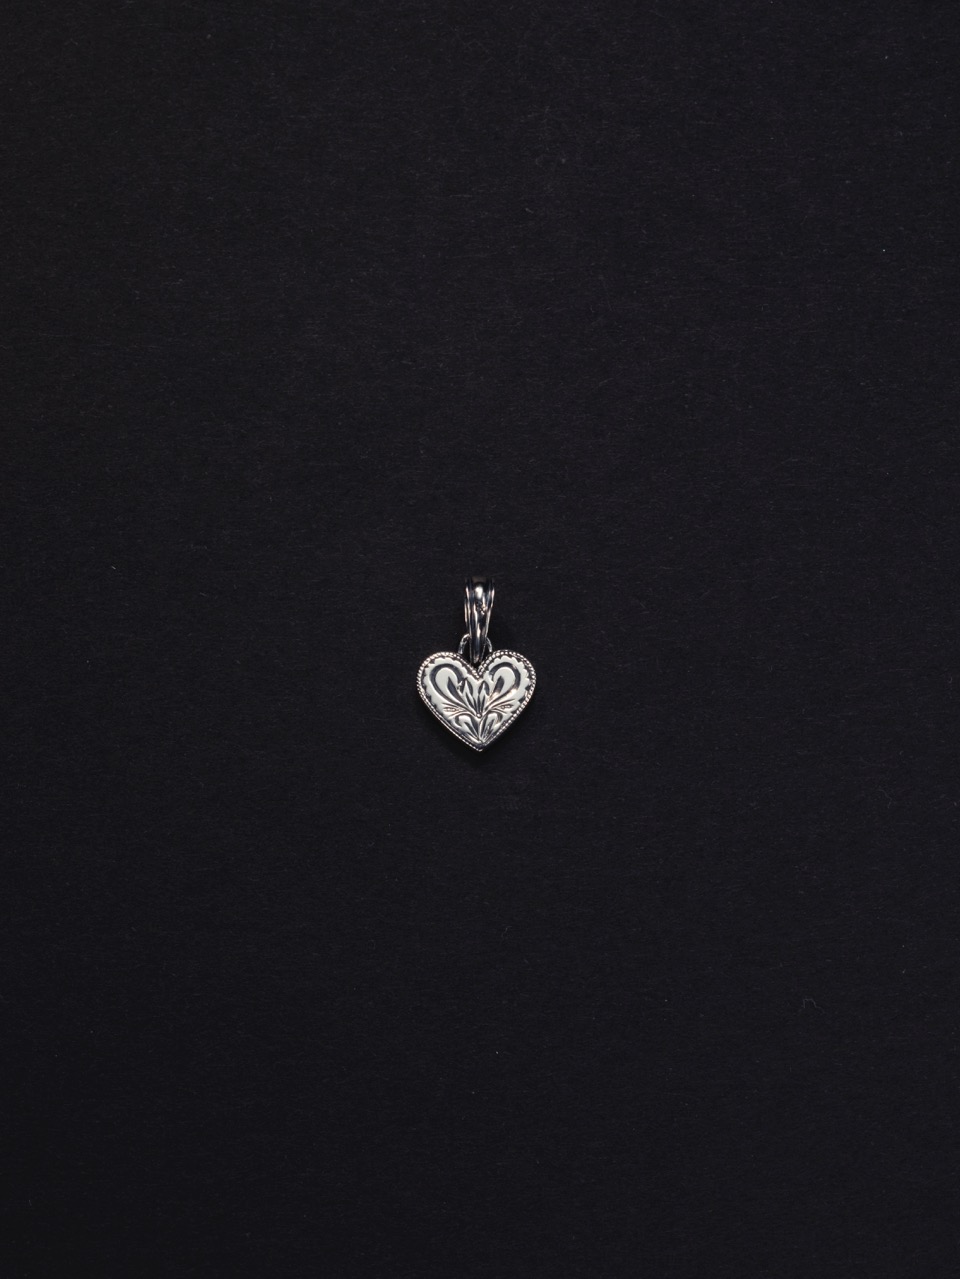 ANTIDOTE BUYERS CLUB Engraved Heart Pendant (Silver) RX-910 公式通販